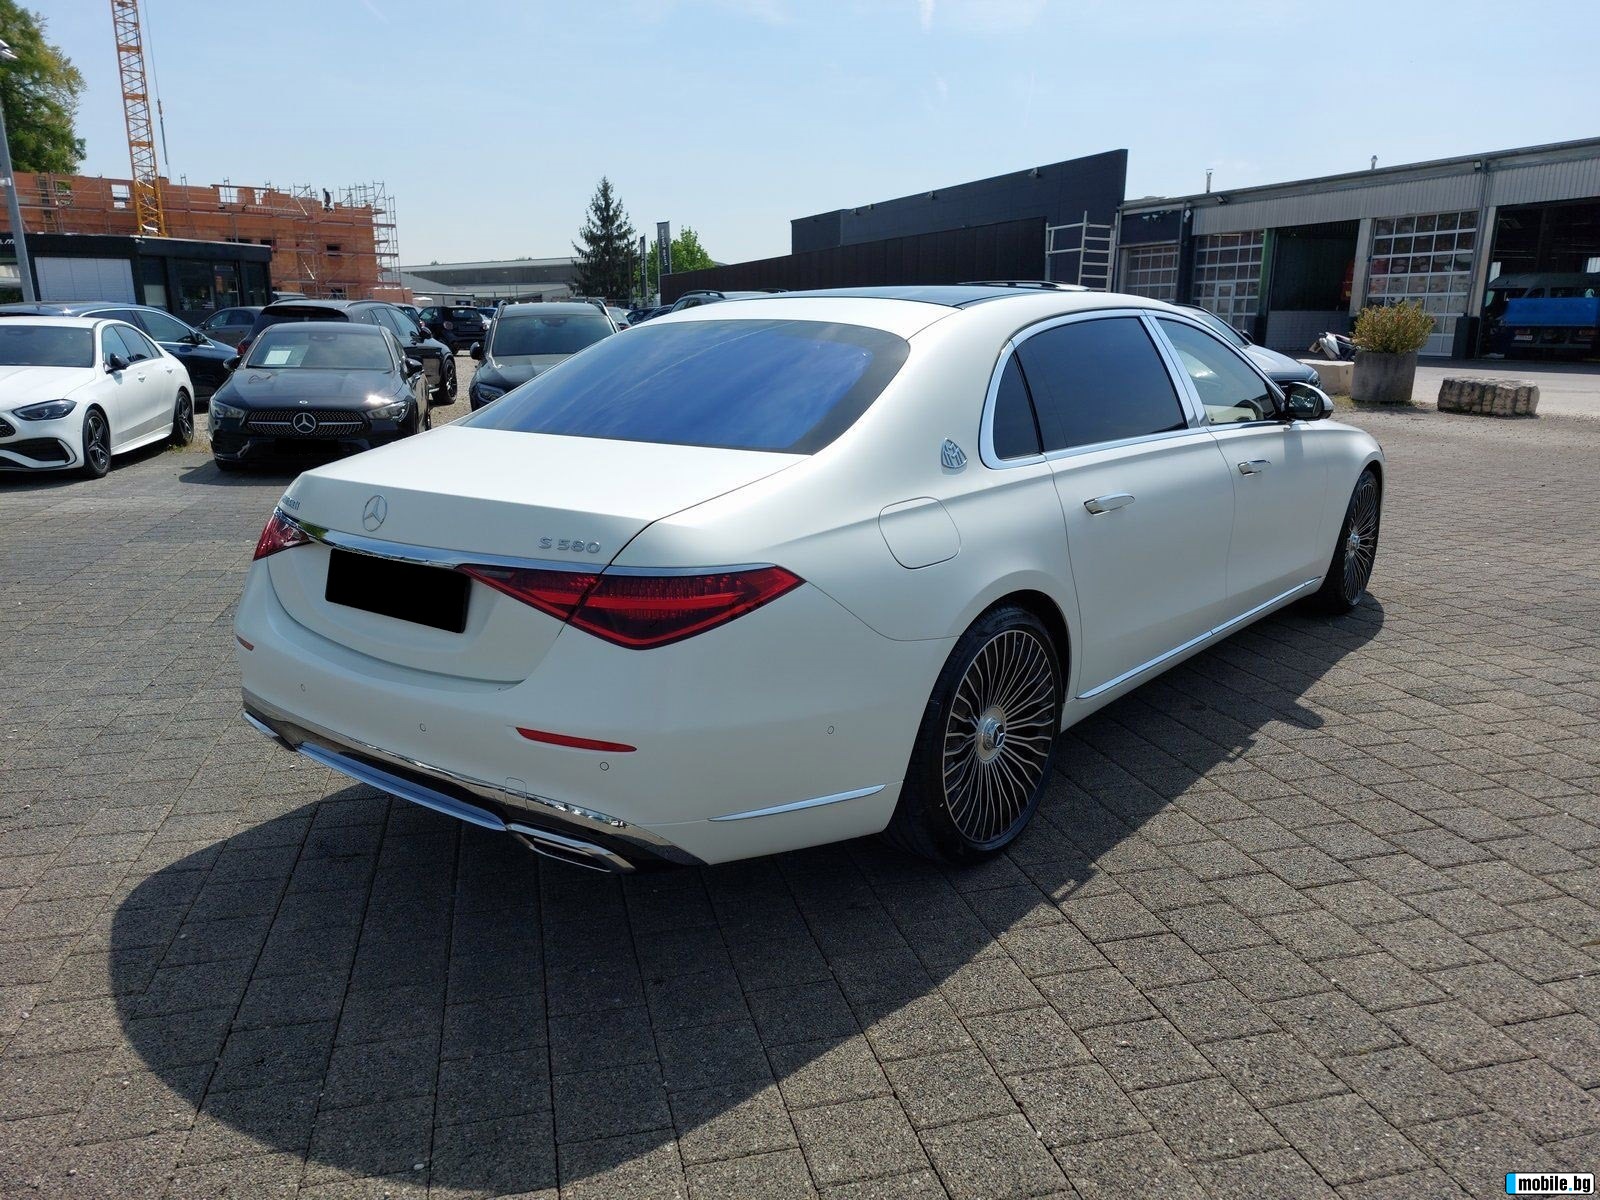 Mercedes-Benz S580 Maybach 4Matic =First Class= Exclusive  | Mobile.bg   3